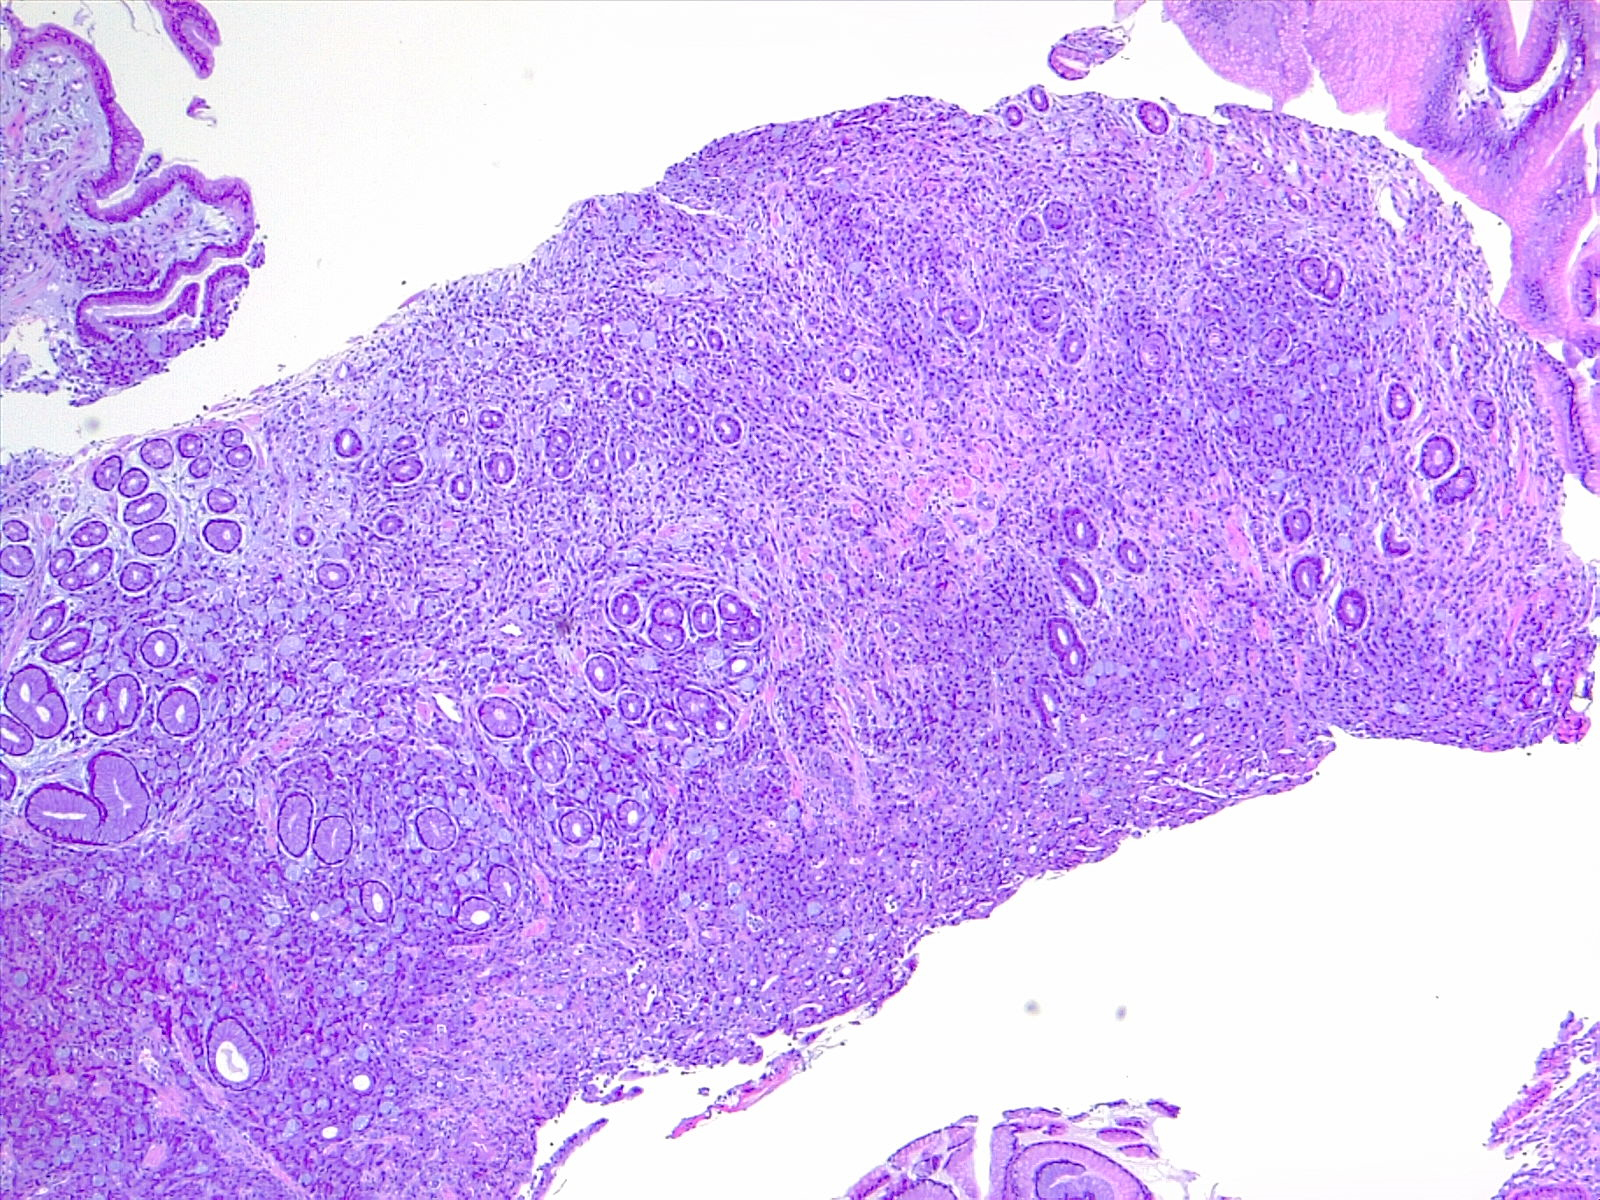 Gastric cancer, signet ring type. Diffuse carcinoma of the stomach. 4x H/E